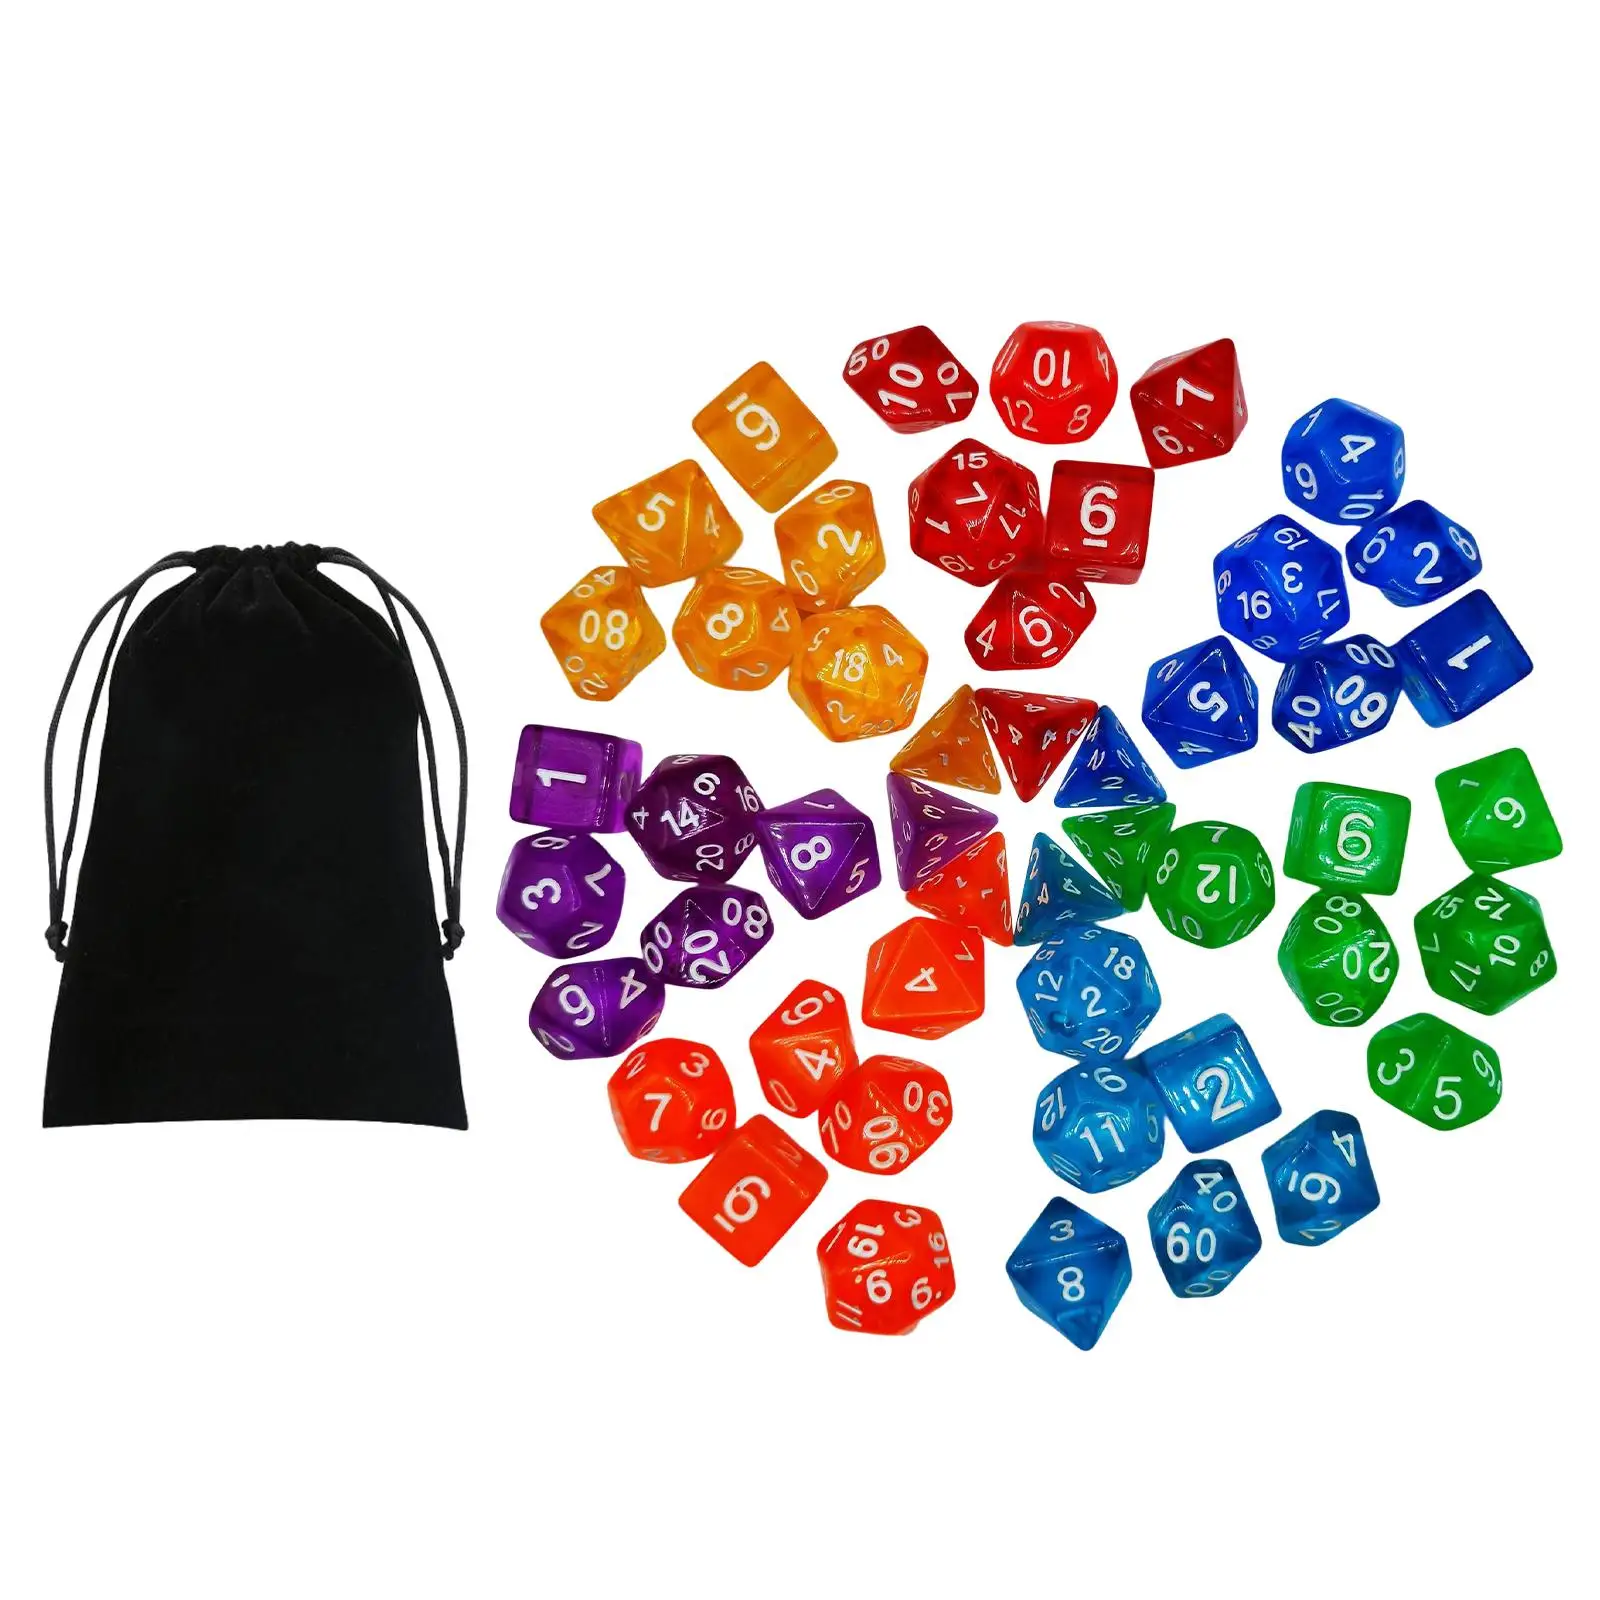 49PCS Engraved Polyhedral Dices Set D4 D6 D8 D10 D12 D20 w/ Pouch Puzzle Games Craft for DND RPG Board Games Math Teaching Aids